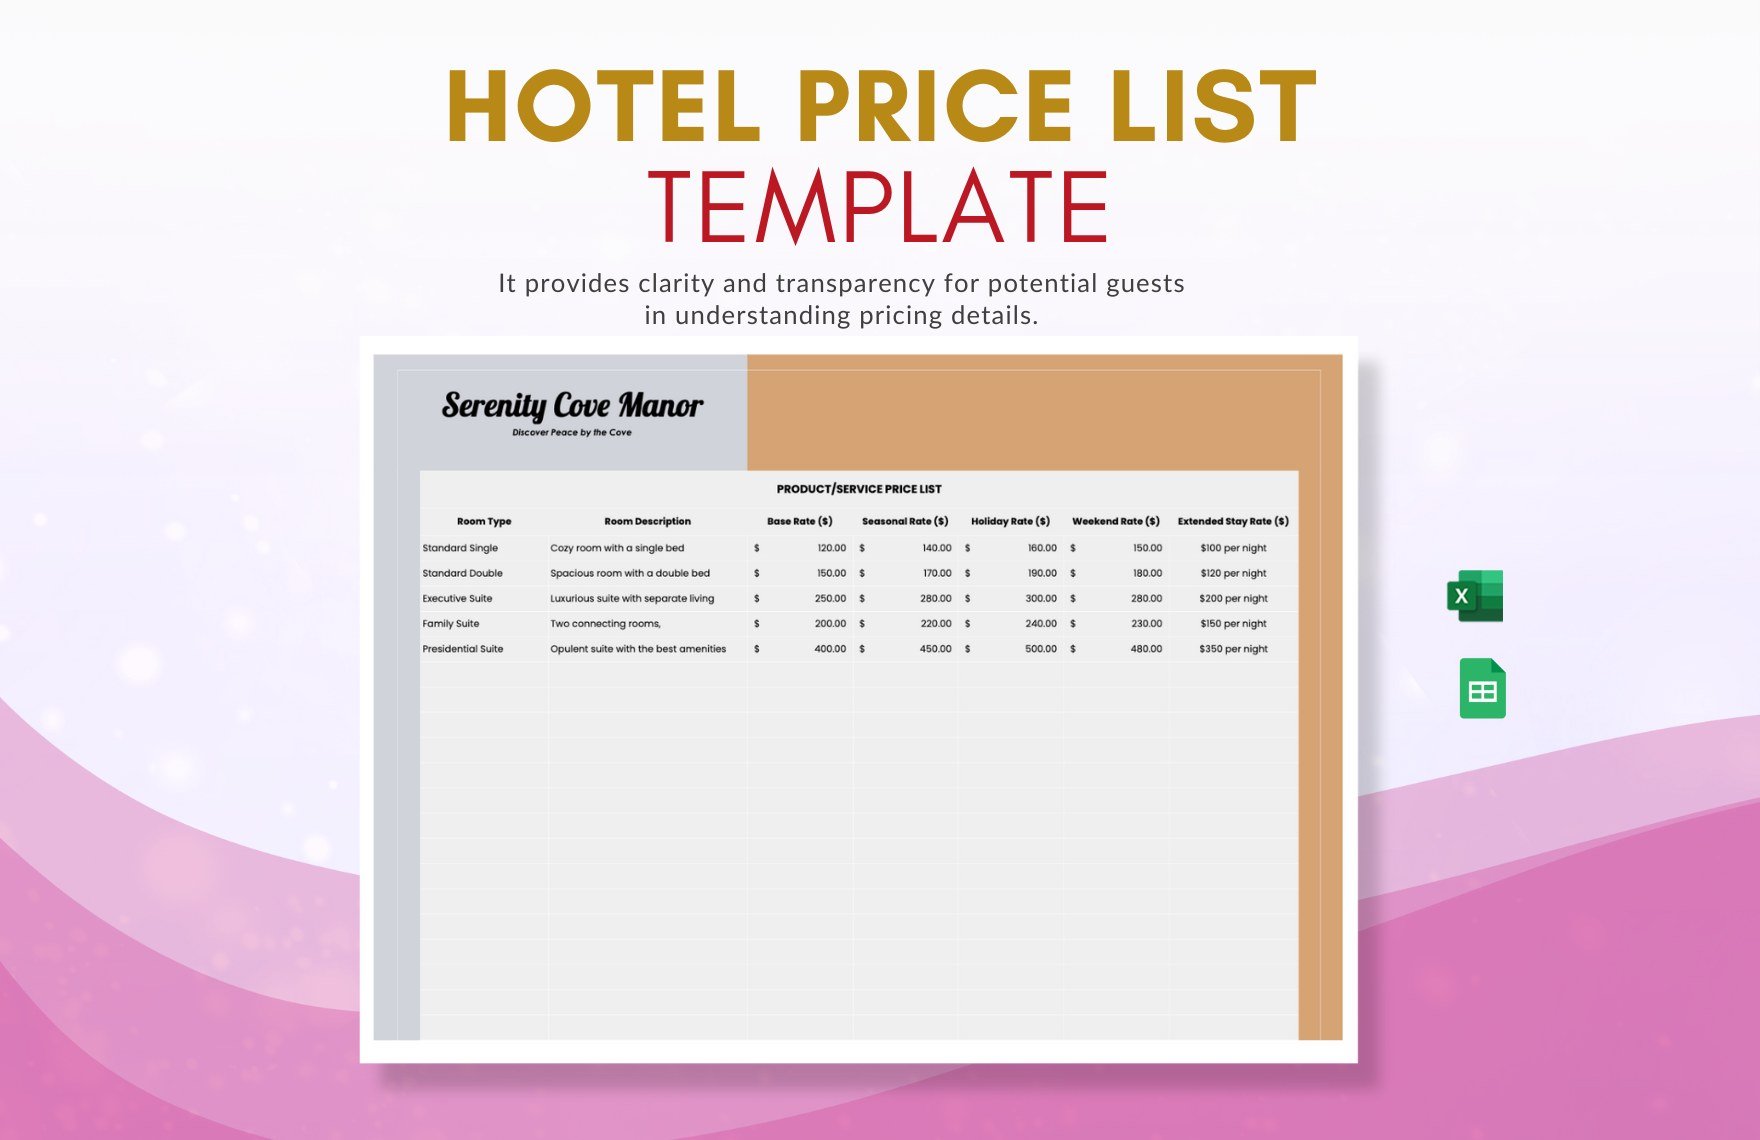 Free Hotel Price List Template in Excel, Google Sheets